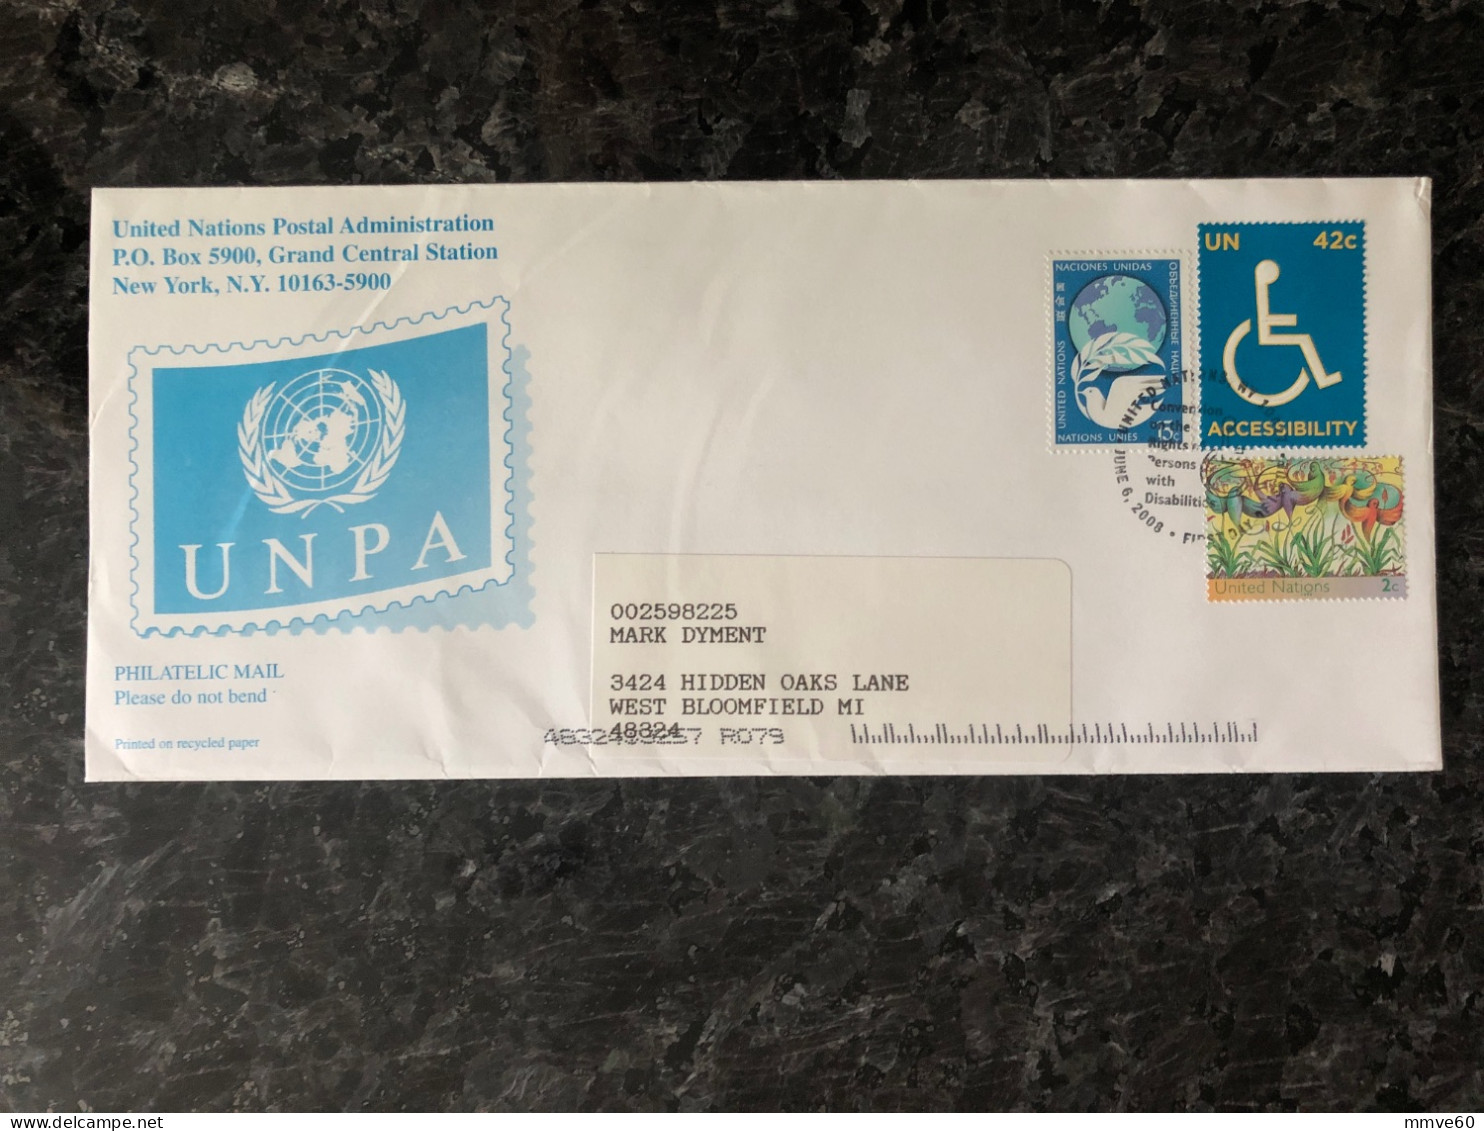 UN UNO  UNITED NATIONS TRAVELLED COVER 2008 YEAR STAMPS DISABLED MEDICINE HEALTH - Covers & Documents